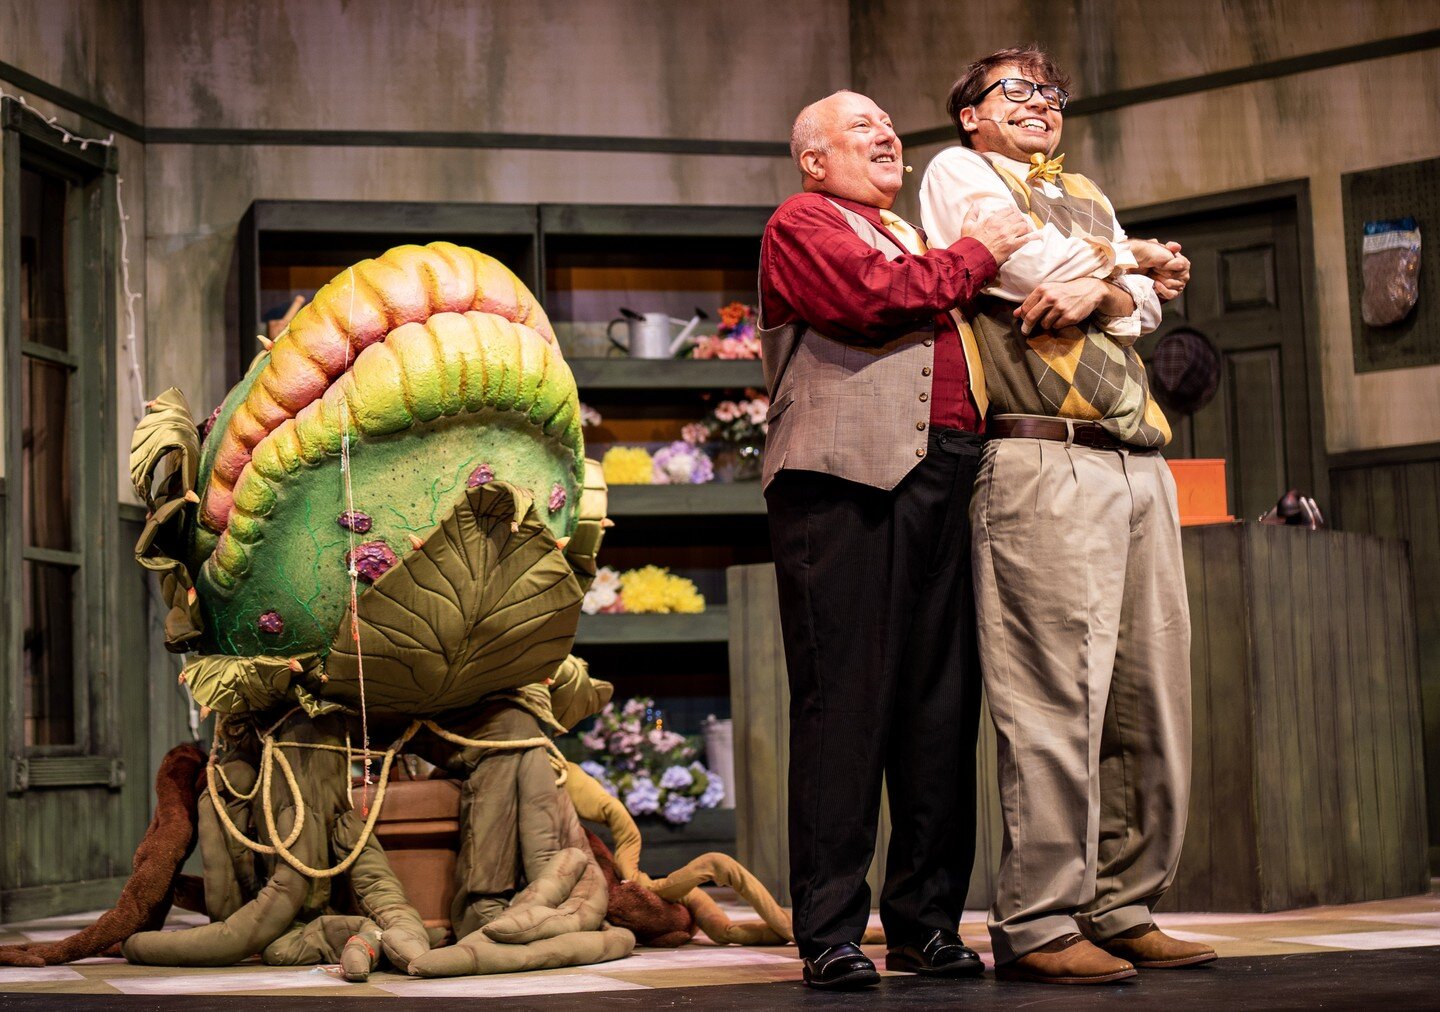 Final week of Little Shop of Horrors at the Straz! 

#strazproduced
#littleshop